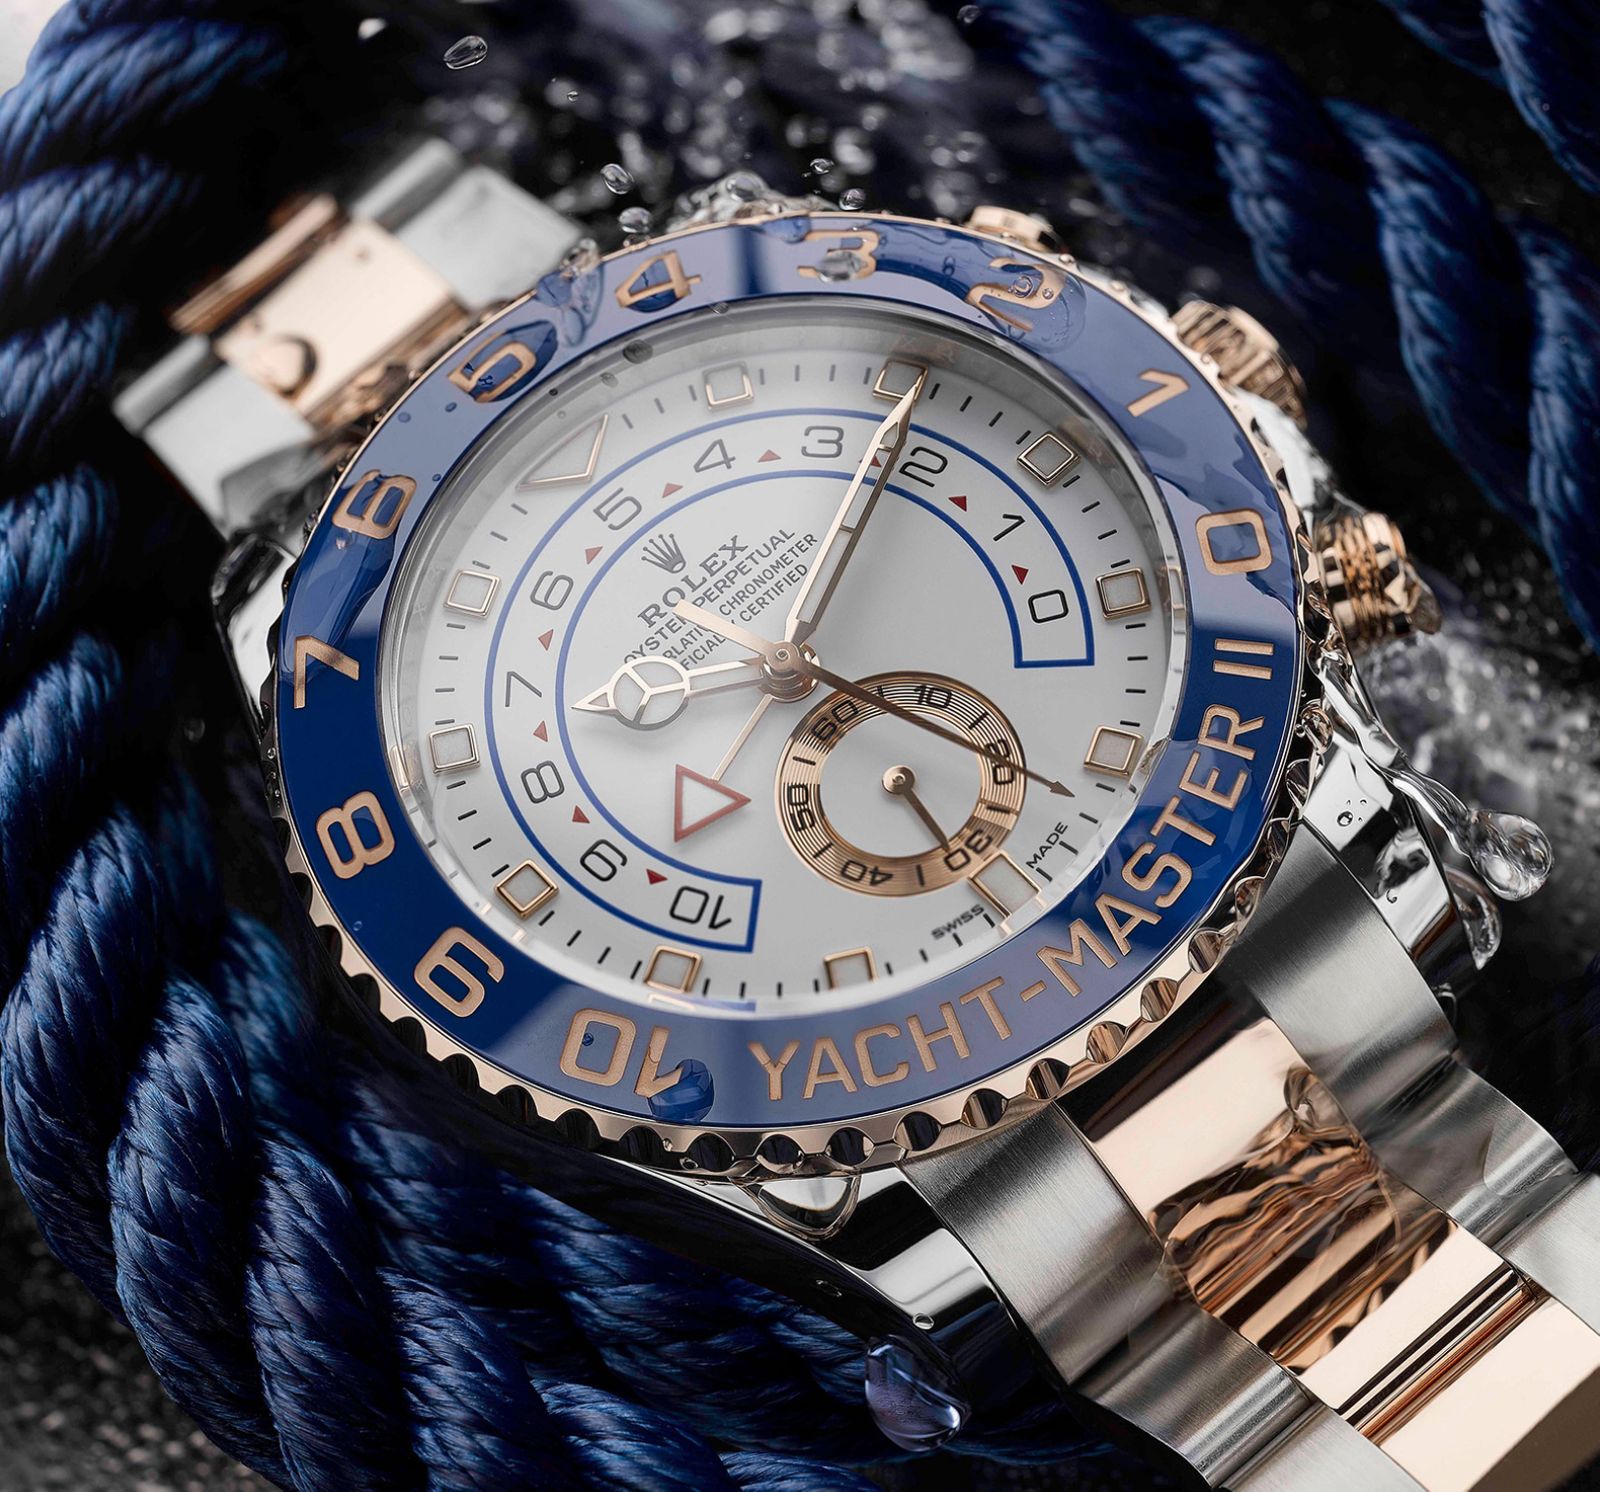 Why There Might Be a New Rolex Yacht-Master II This Year